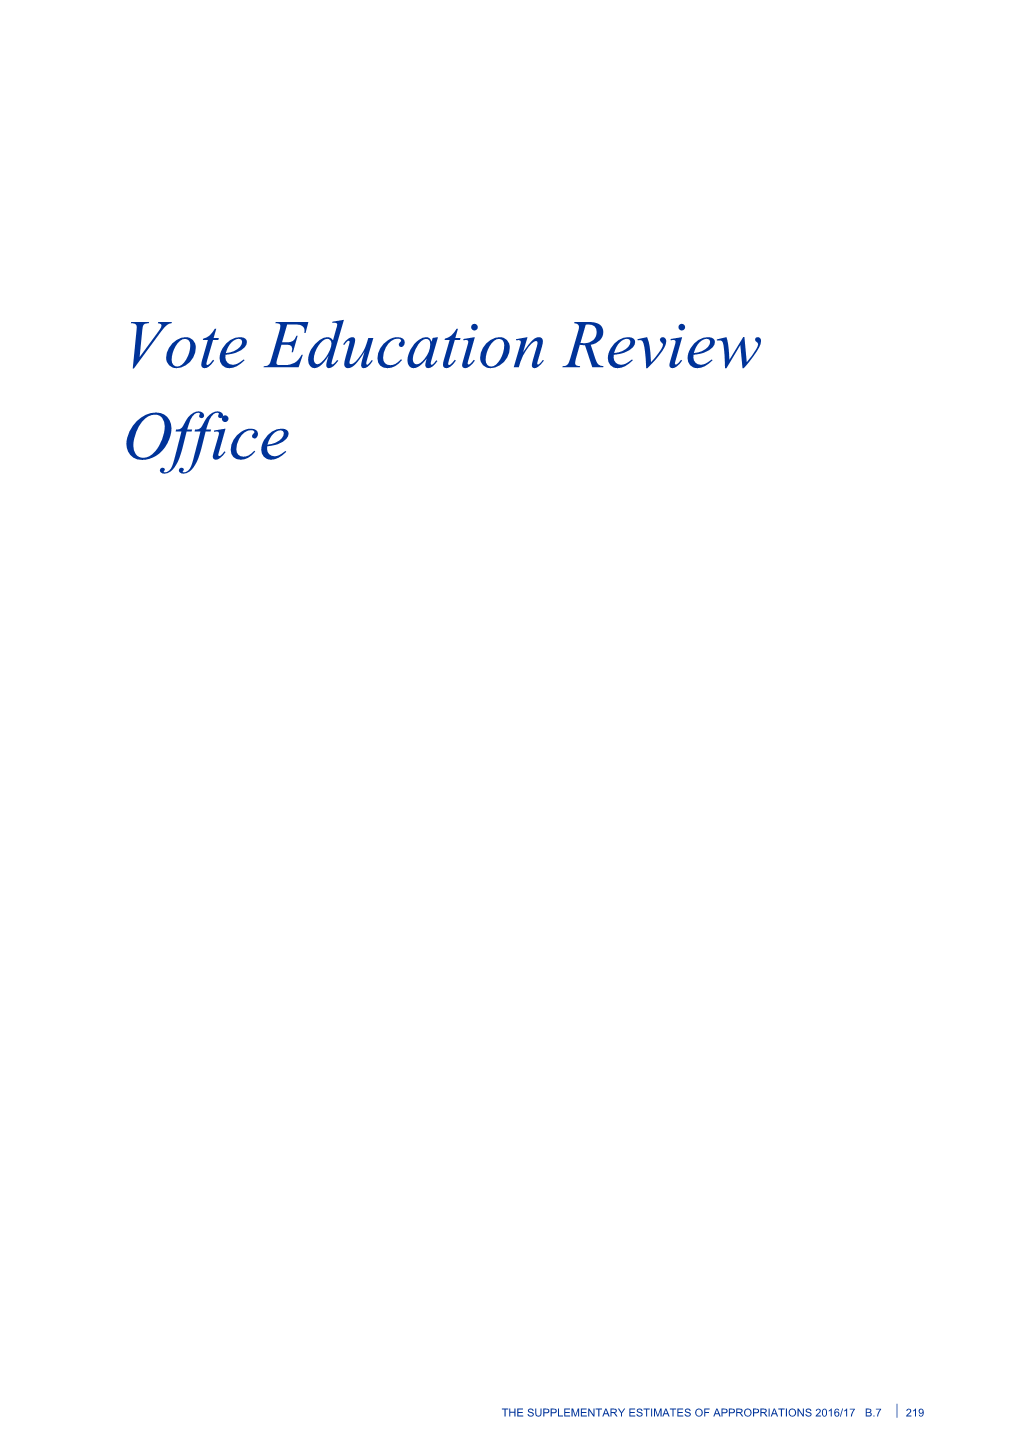 Vote Education Review Office - Supplementary Estimates of Appropriations 2016/17 - Budget 2017